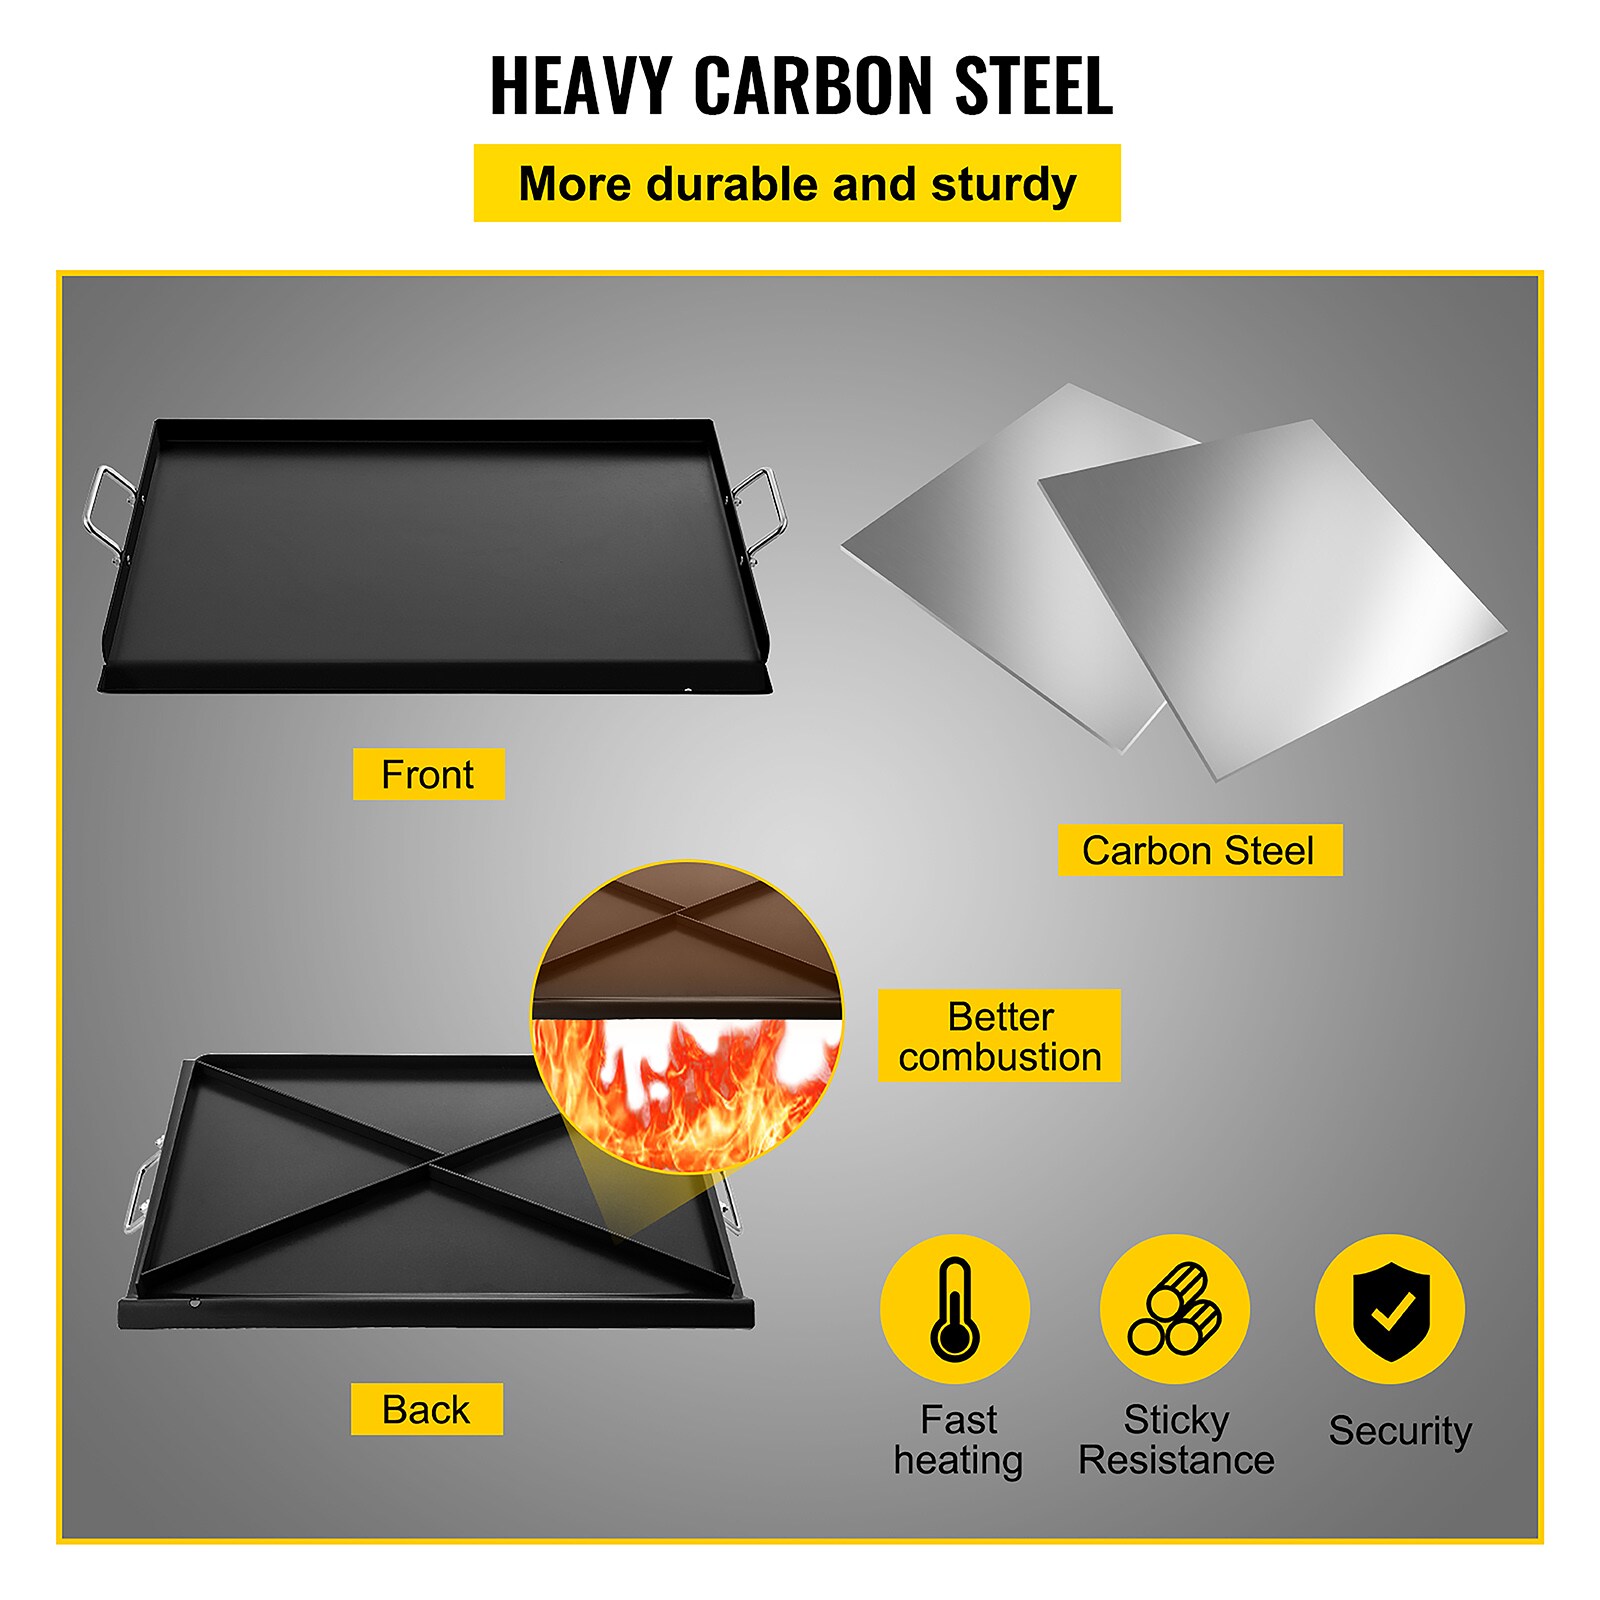 Will my carbon steel griddle destroy my stove? : r/carbonsteel